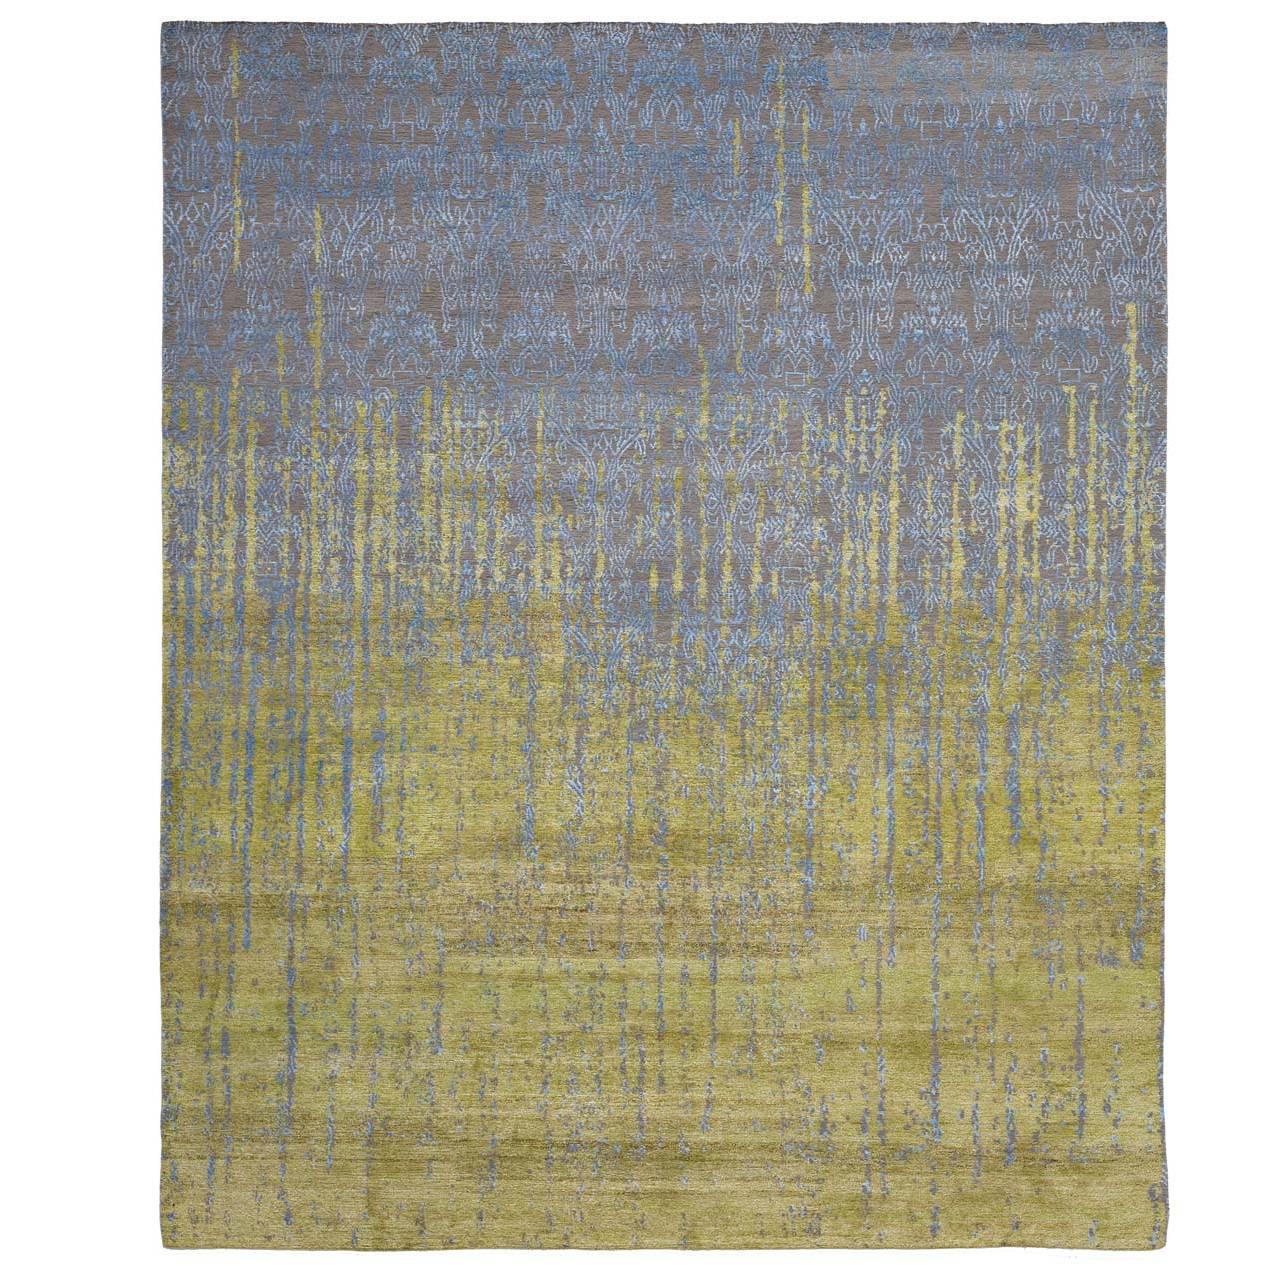 Roma Vendetta from Erased Classic Carpet Collection by Jan Kath